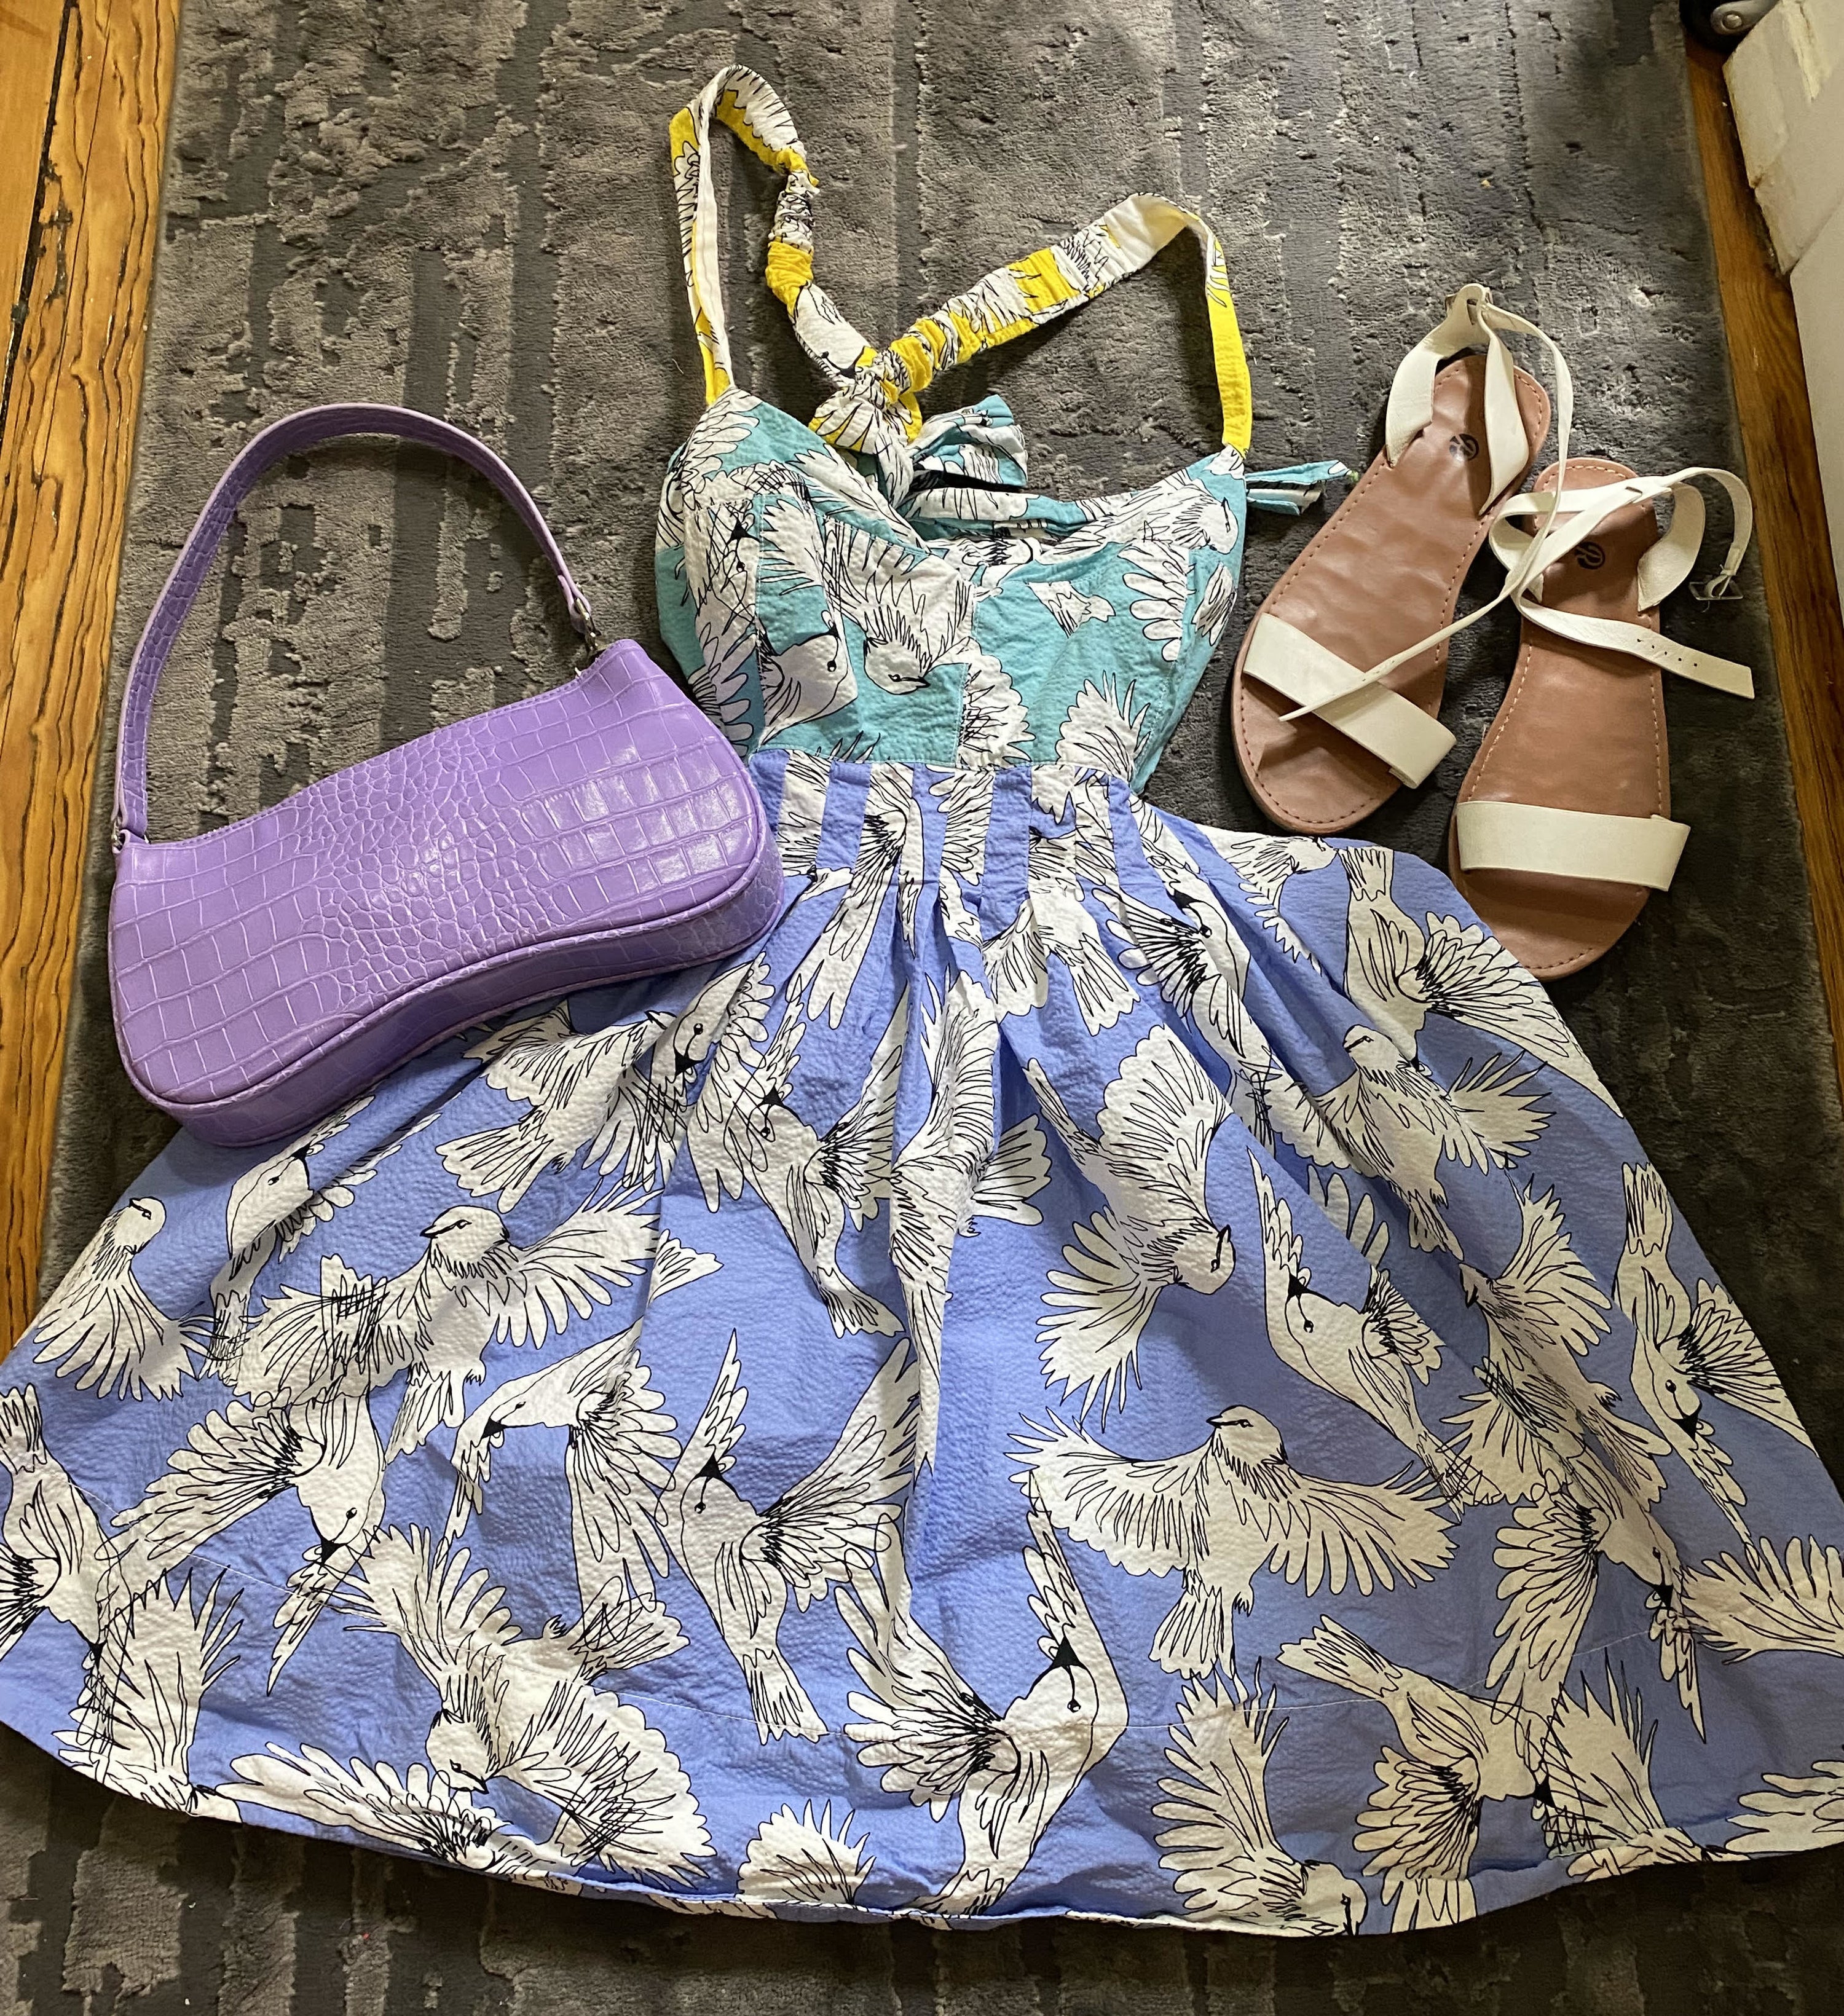 dress on floor with a purse and sandals beside of it